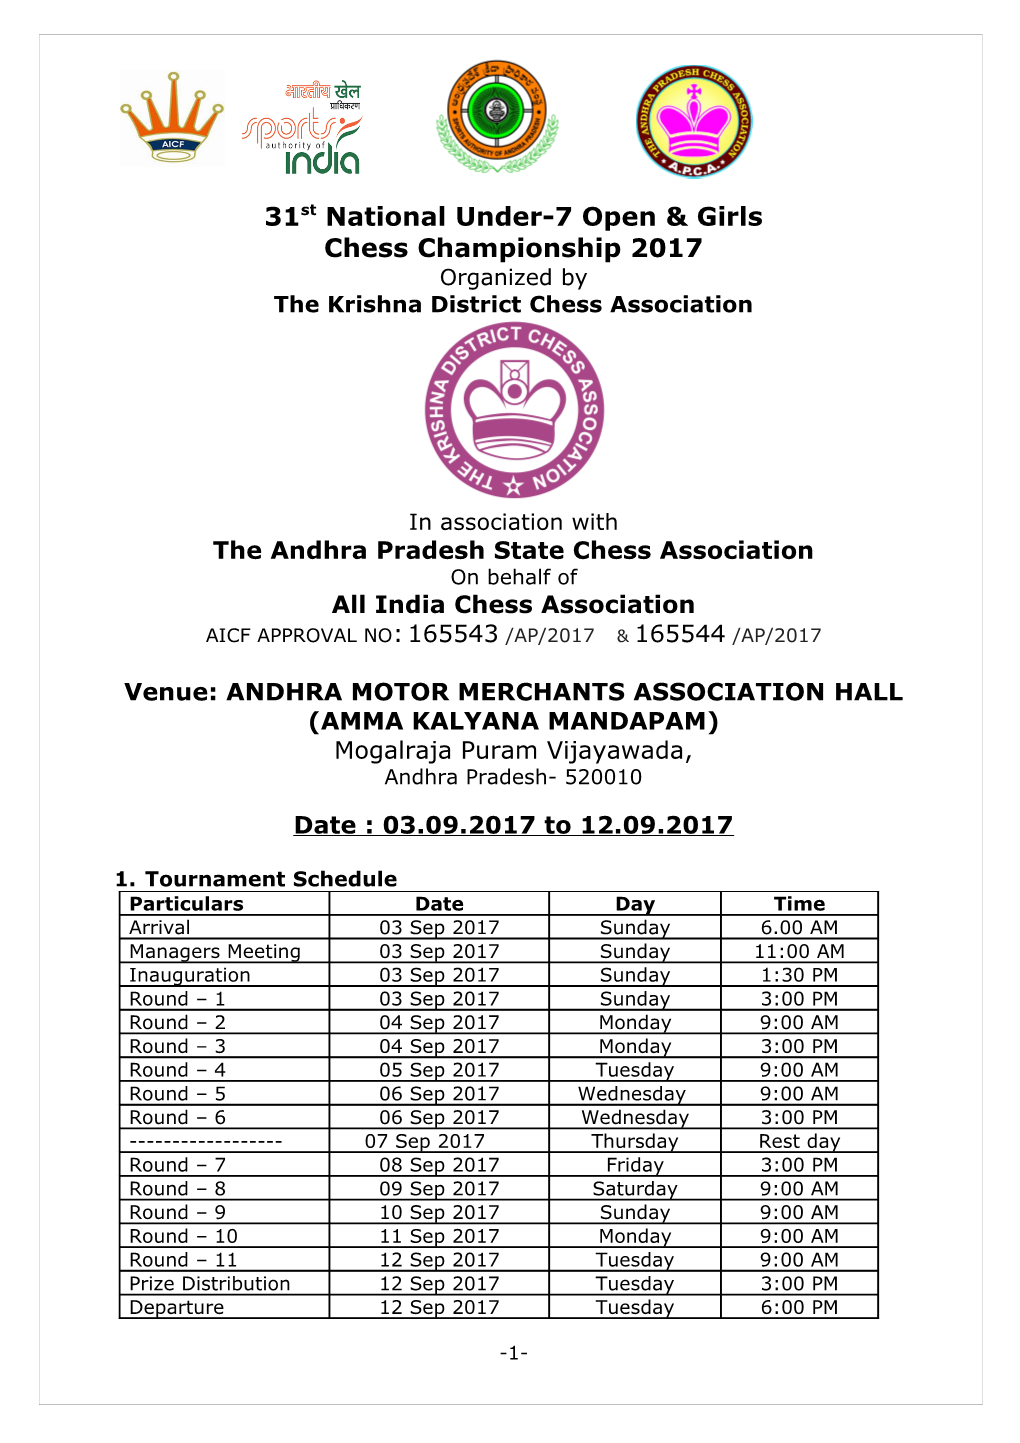 27Th National Under-13 OPEN & GIRLS CHESS CHAMPIONSHIP